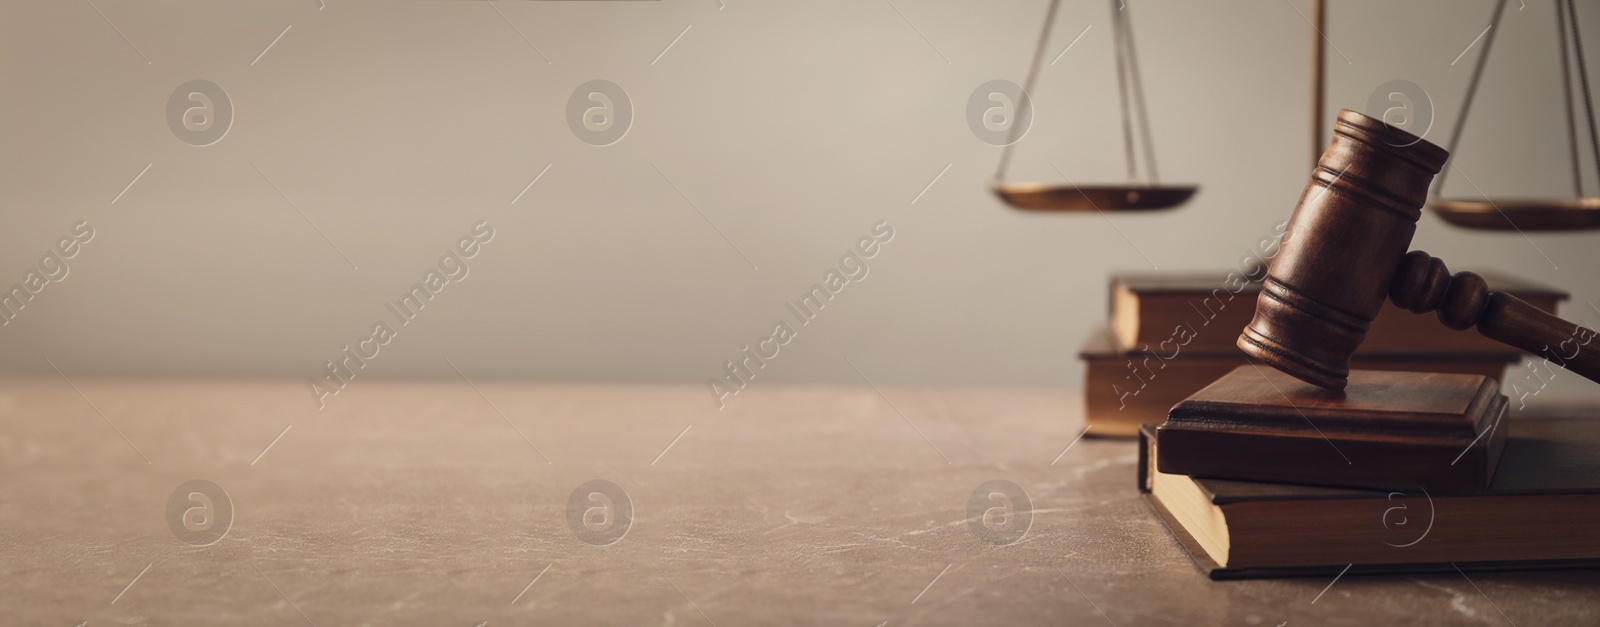 Image of Wooden gavel with scales of justice and books on lawyer's table, space for text. Banner design